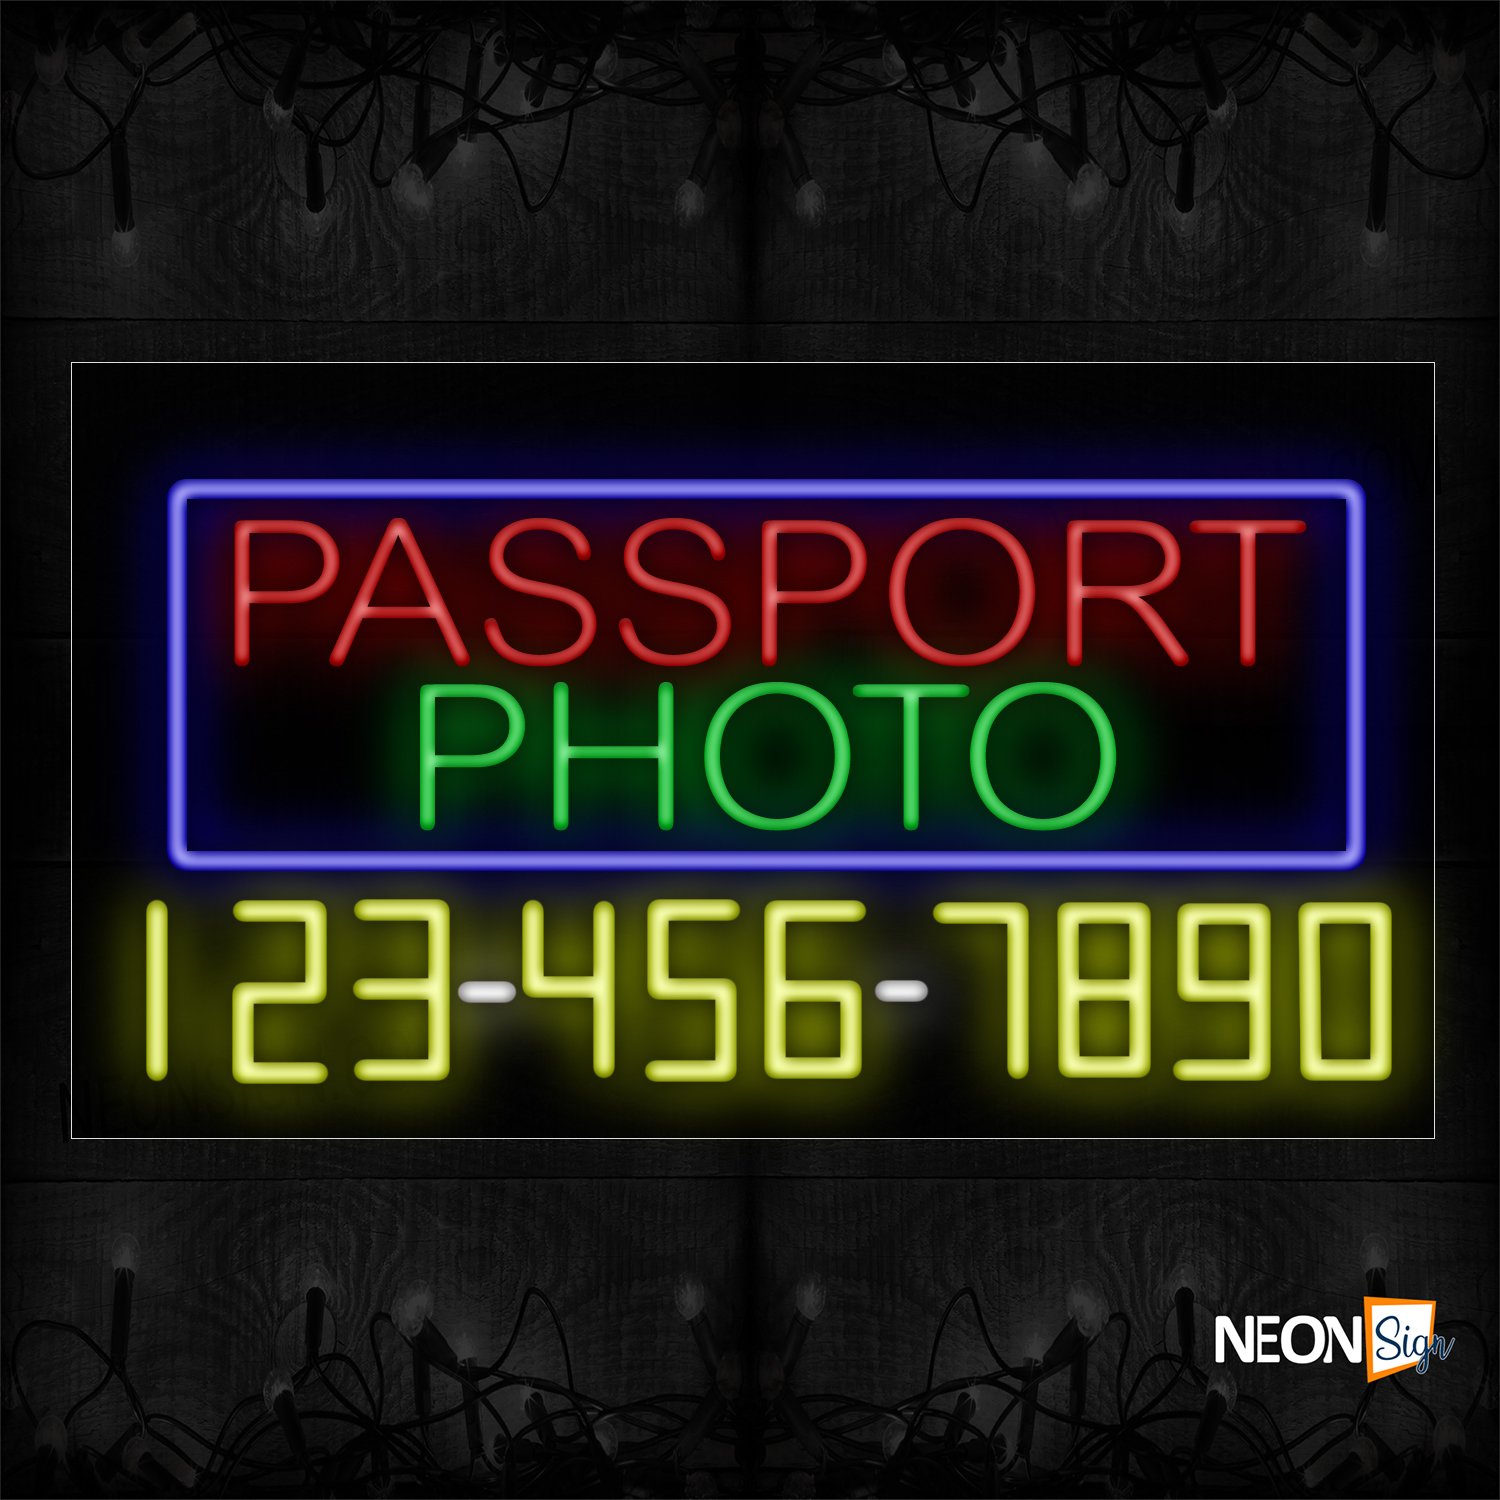 Image of 15091 Passport Photo And Phone Number With Blue Border Neon Signs_20x37 Black Backing